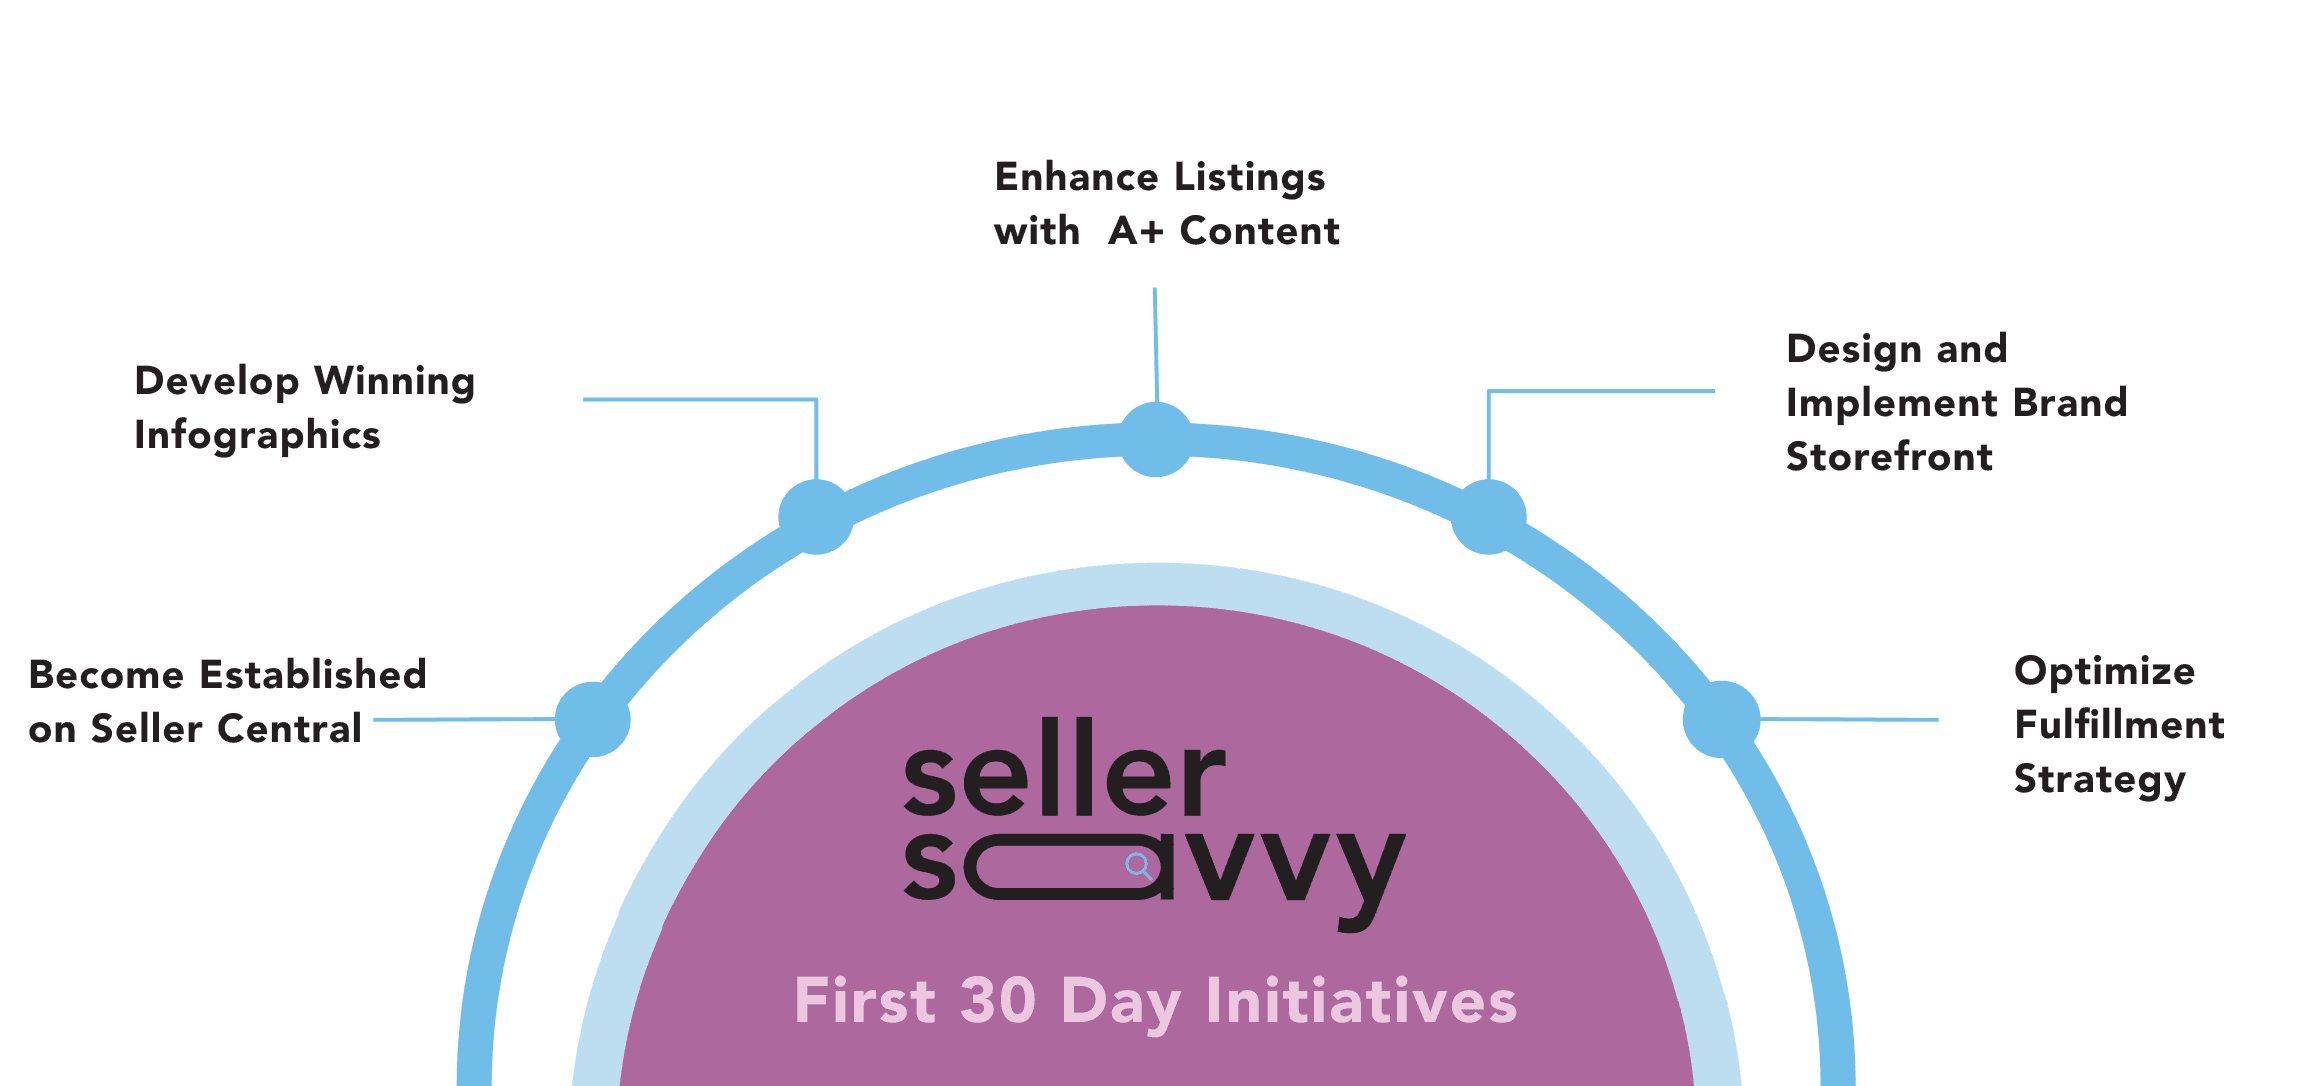 Seller Savvy first 30 day initiatives